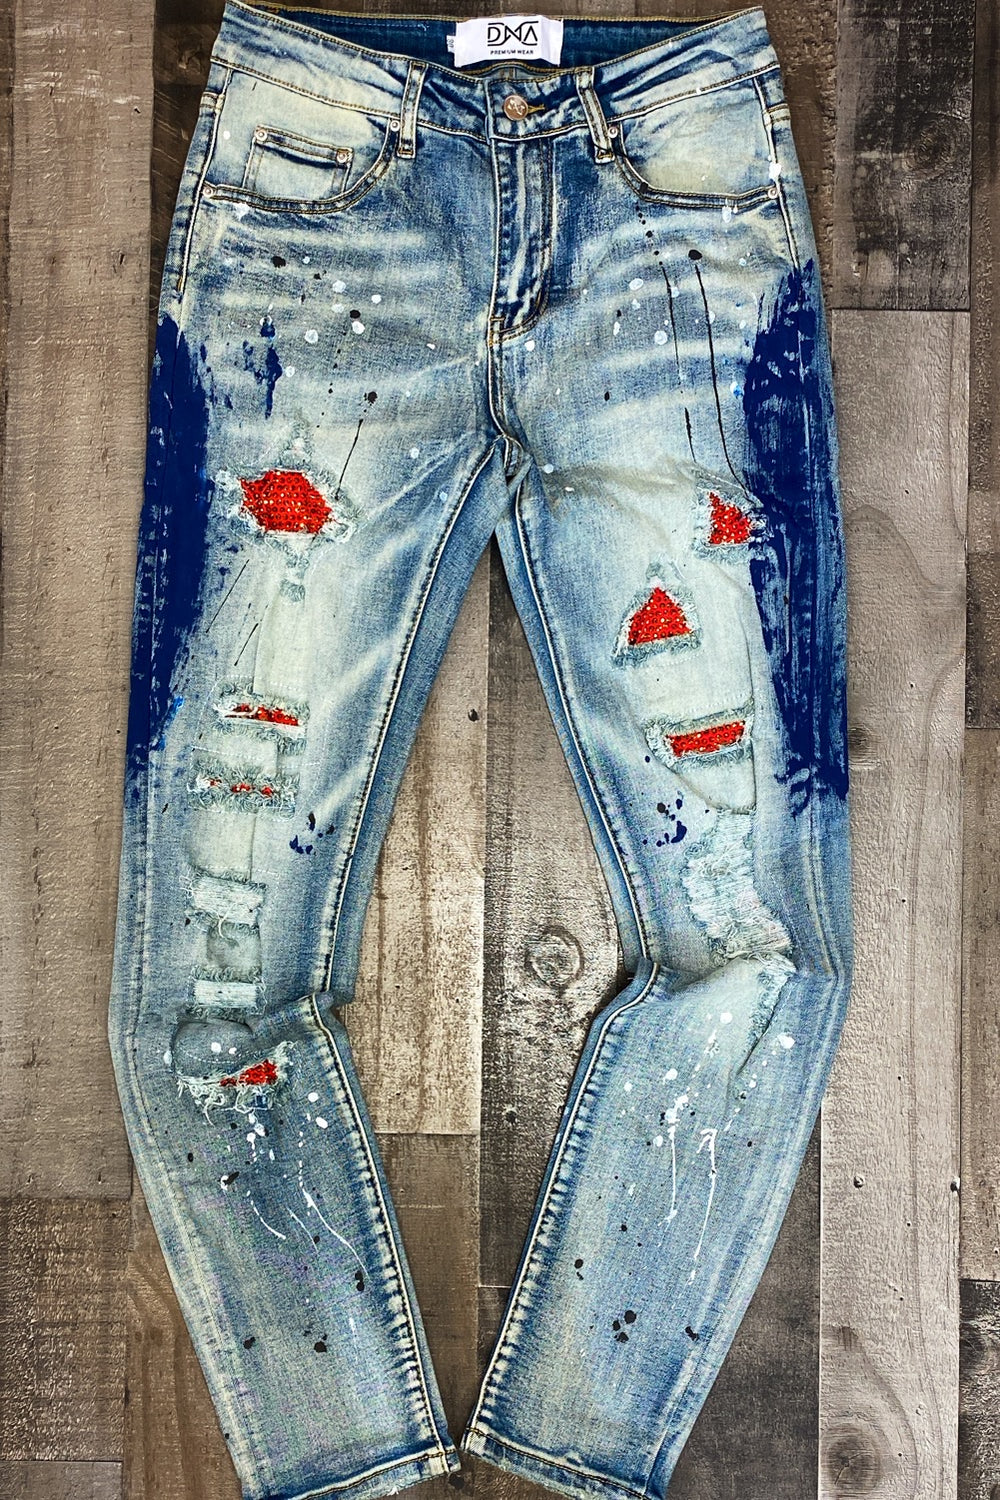 Dna Premium Wear- studded color patch jeans (blue/red)